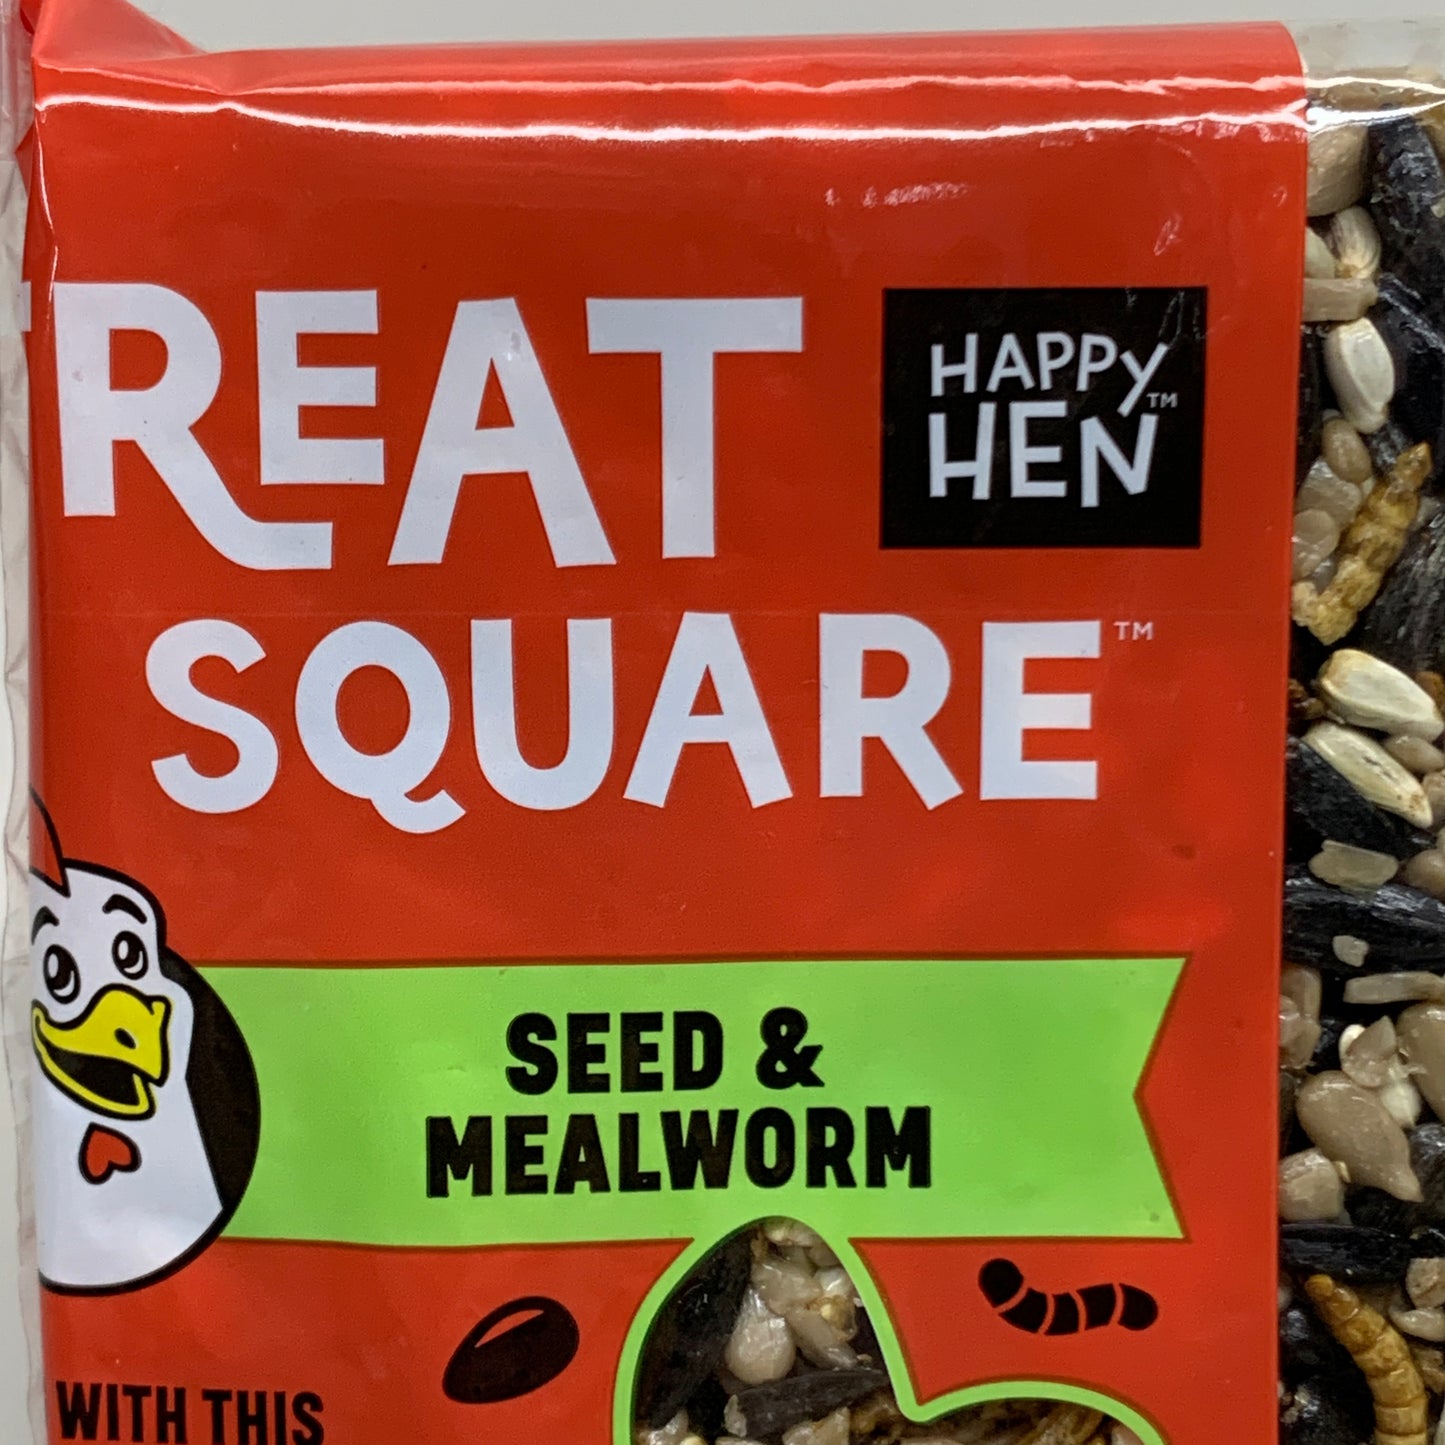 HAPPY HEN (3 PACK) Treat Square Mealworm & Seed 6 oz 855297003407